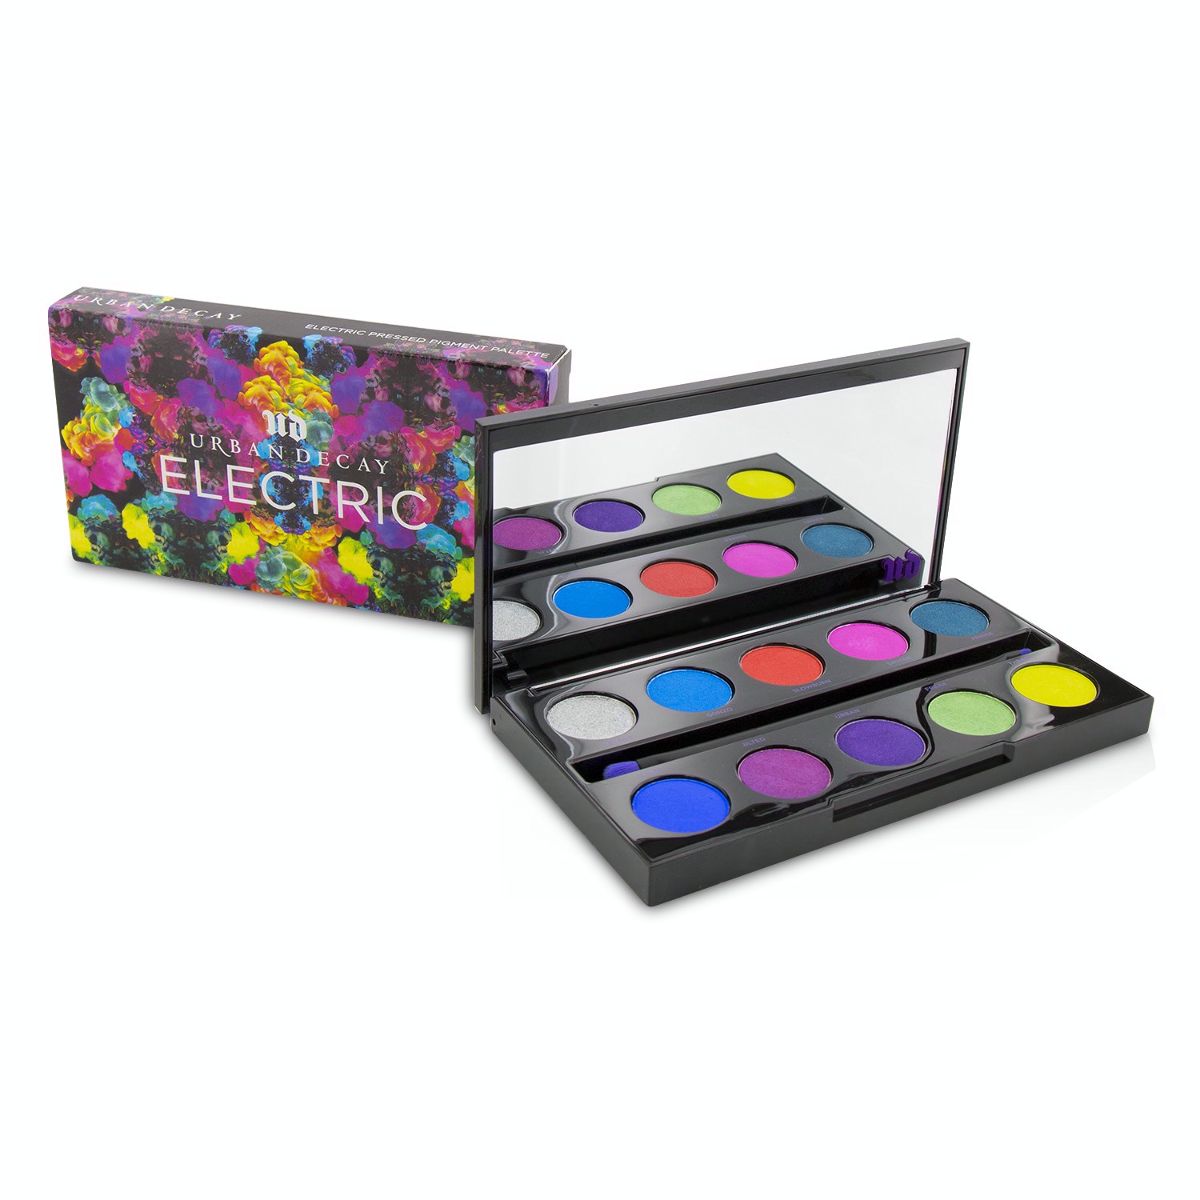 Electric Pressed Pigment Palette: 10x Pressed Pigment 1x Double Ended Pressed Pigment Brush Urban Decay Image